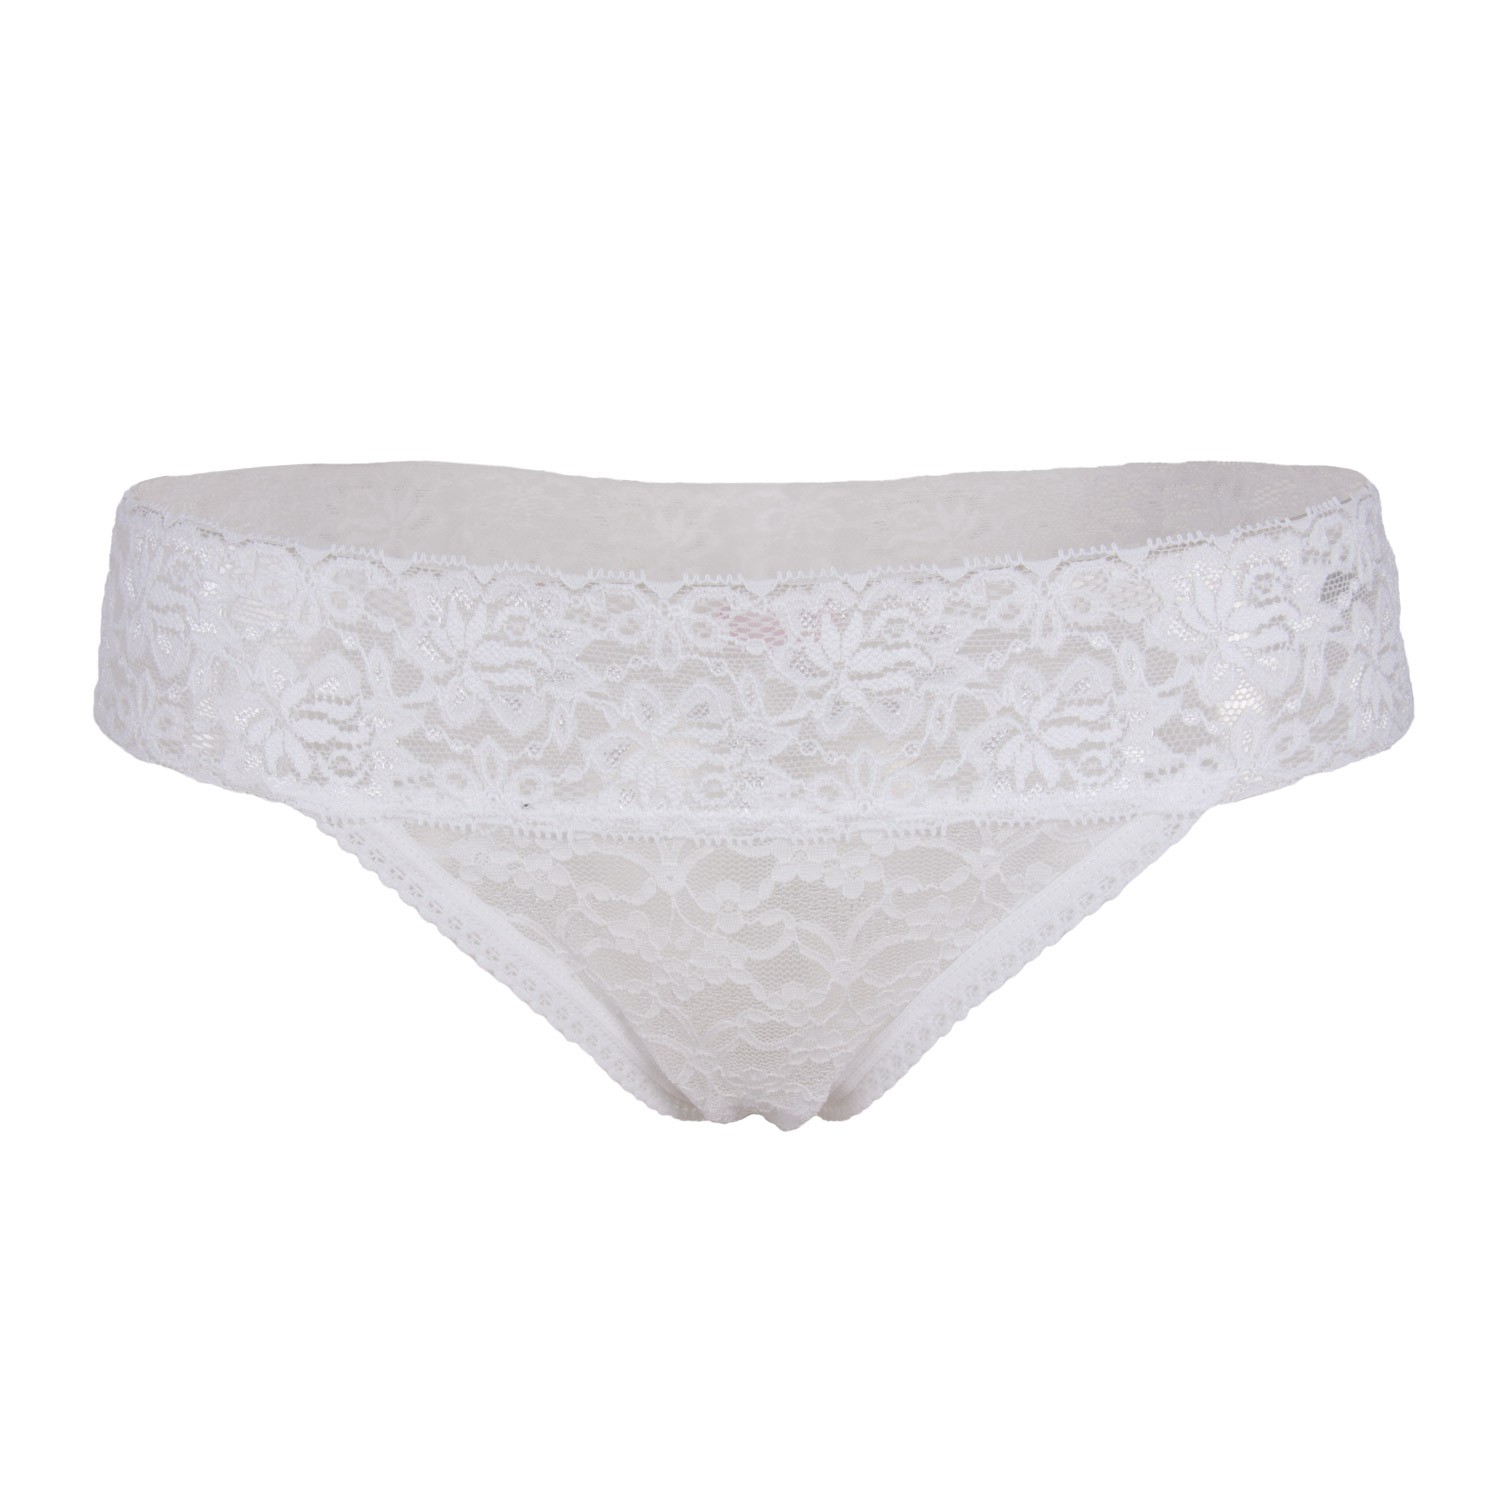 Björn Borg Love All Lace String